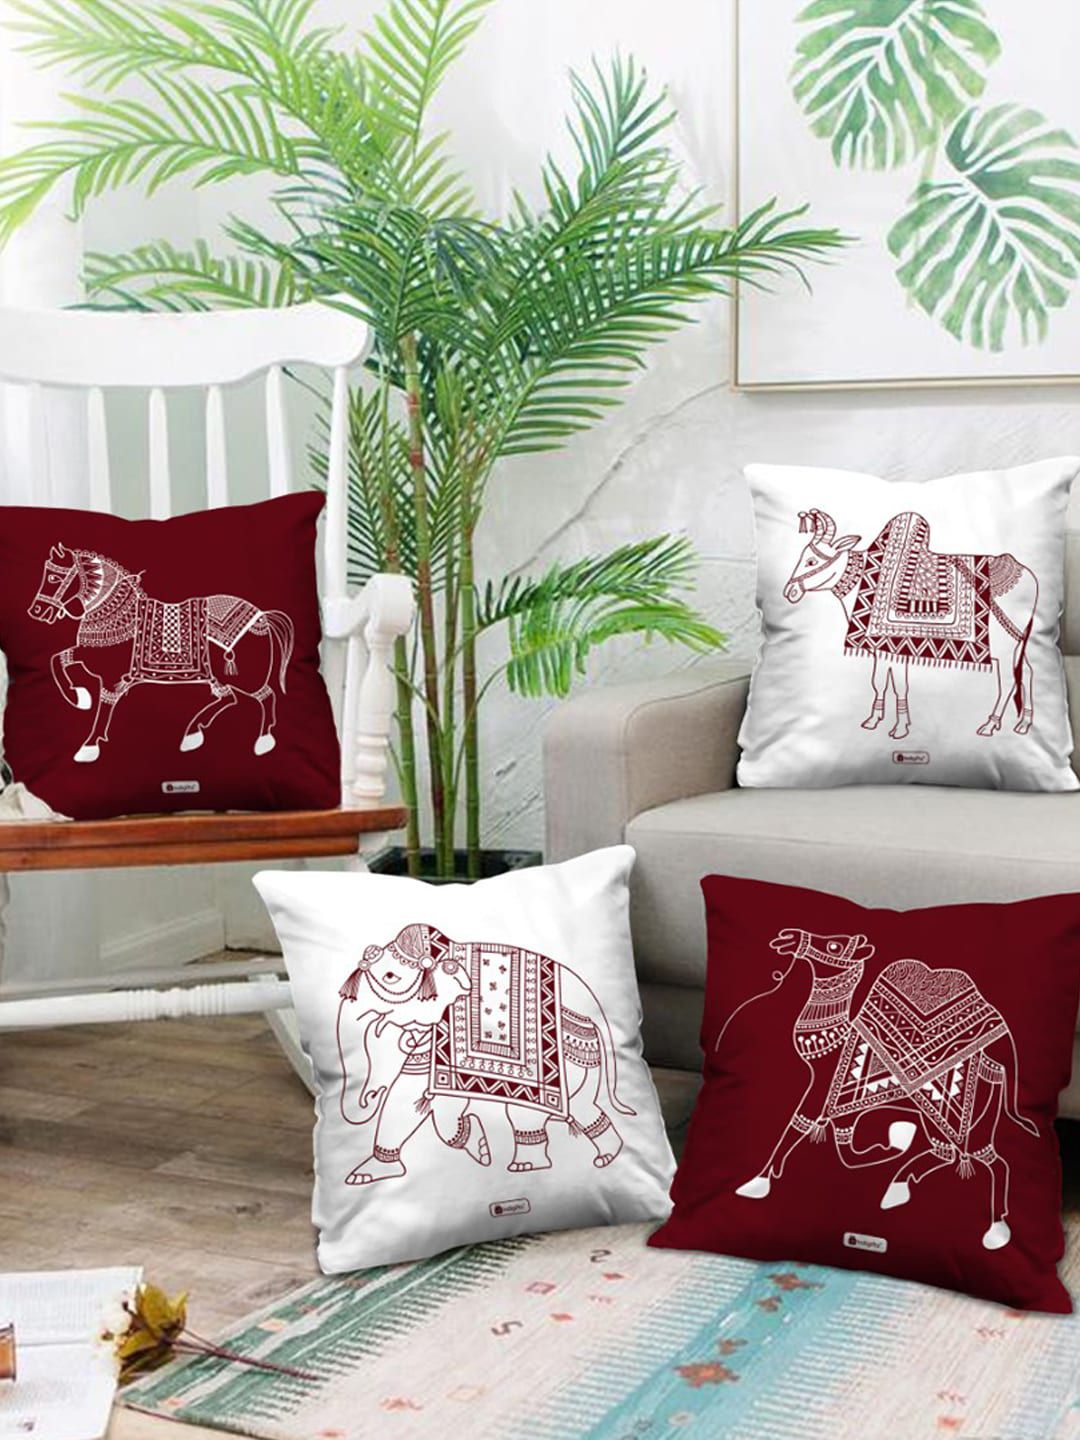 Indigifts Set of 4 White & Maroon Animal Pattern Printed Cotton Floor Cushions Price in India